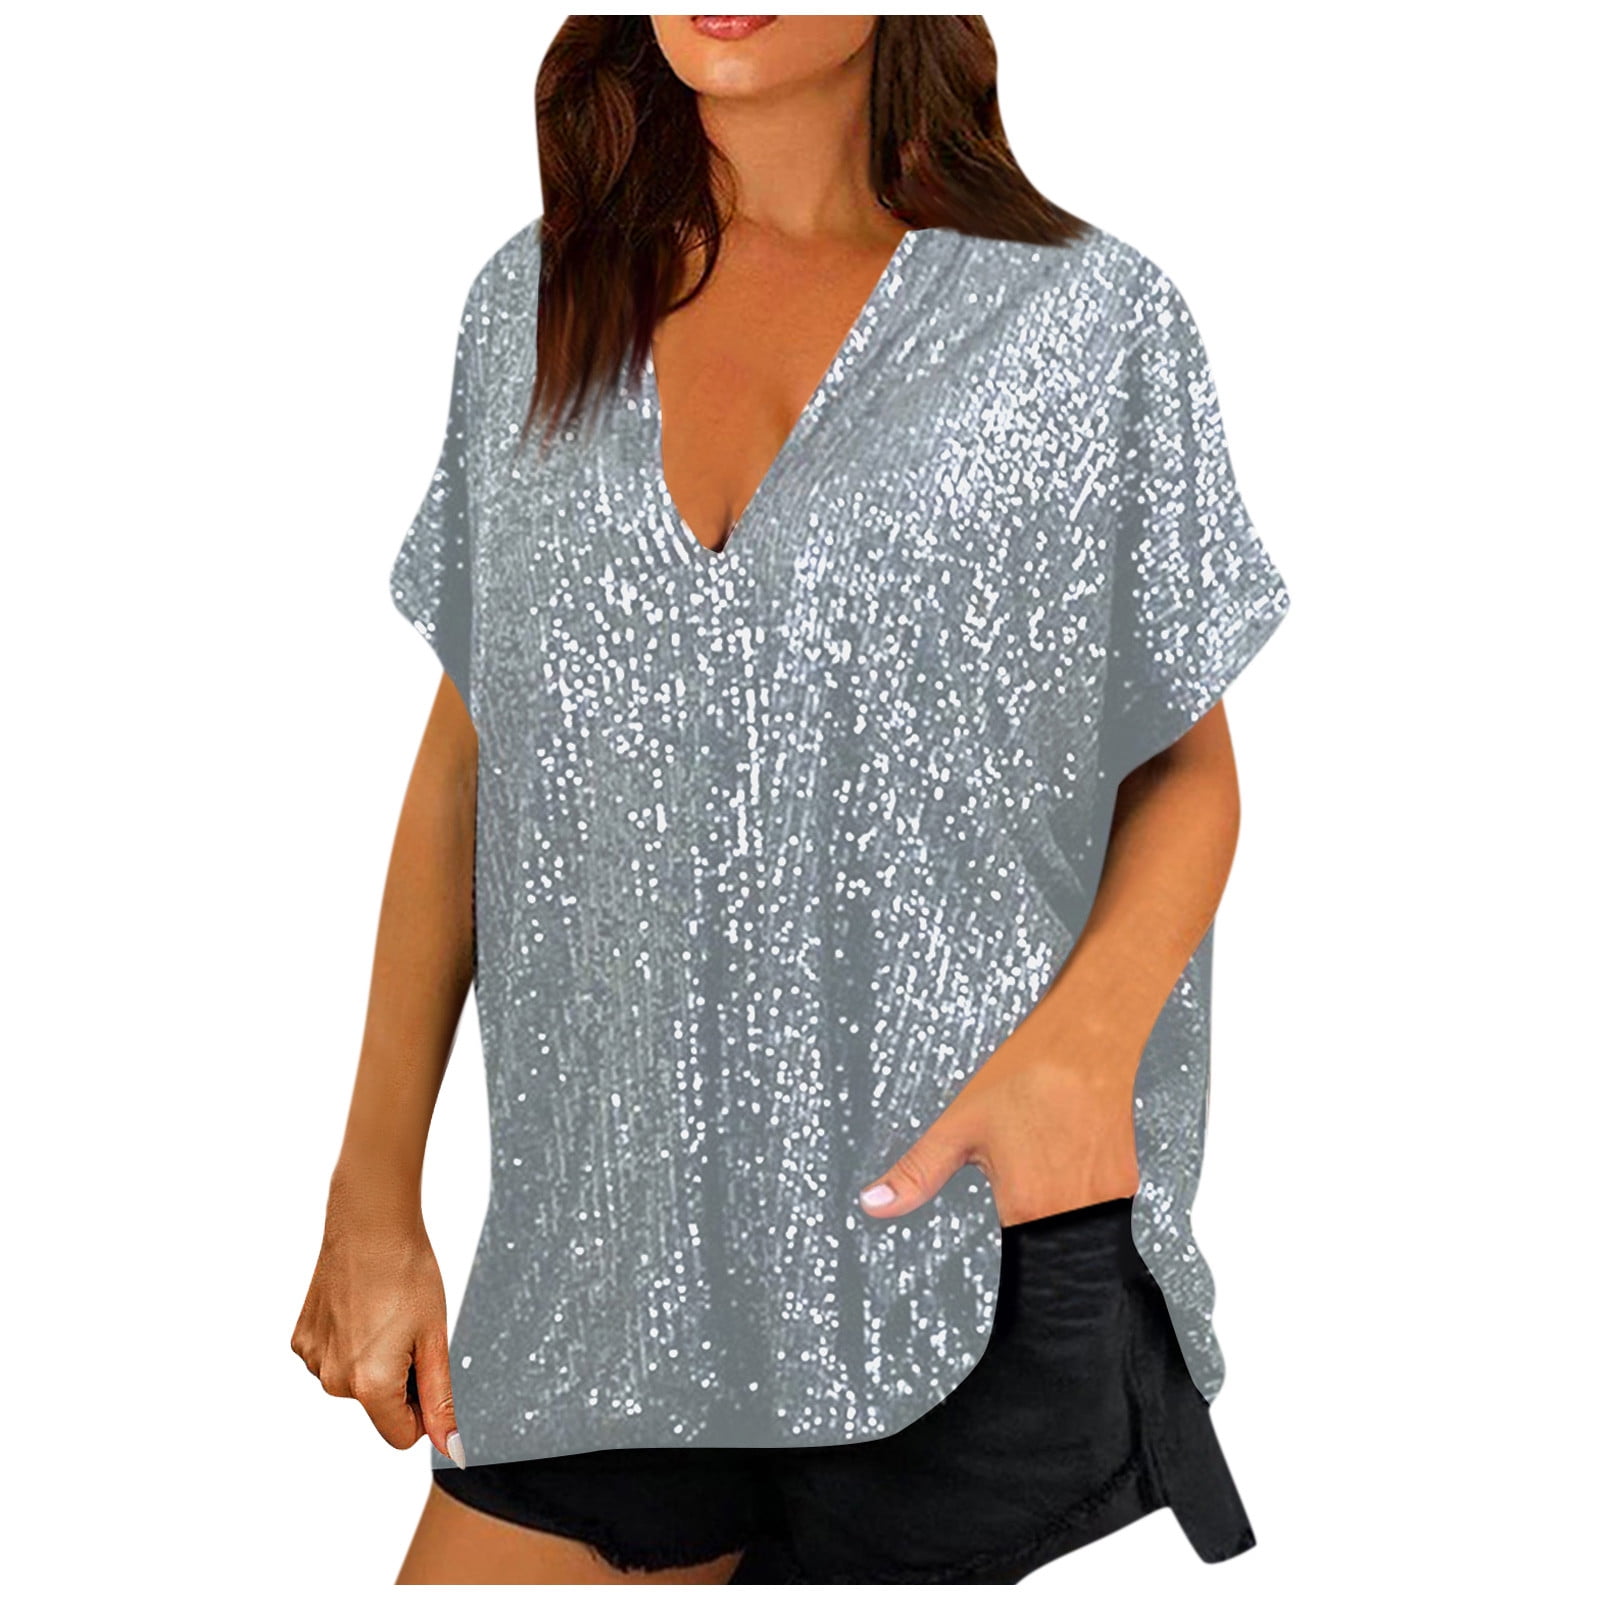 Shiny Silver Sequin Top - Dressy Tops